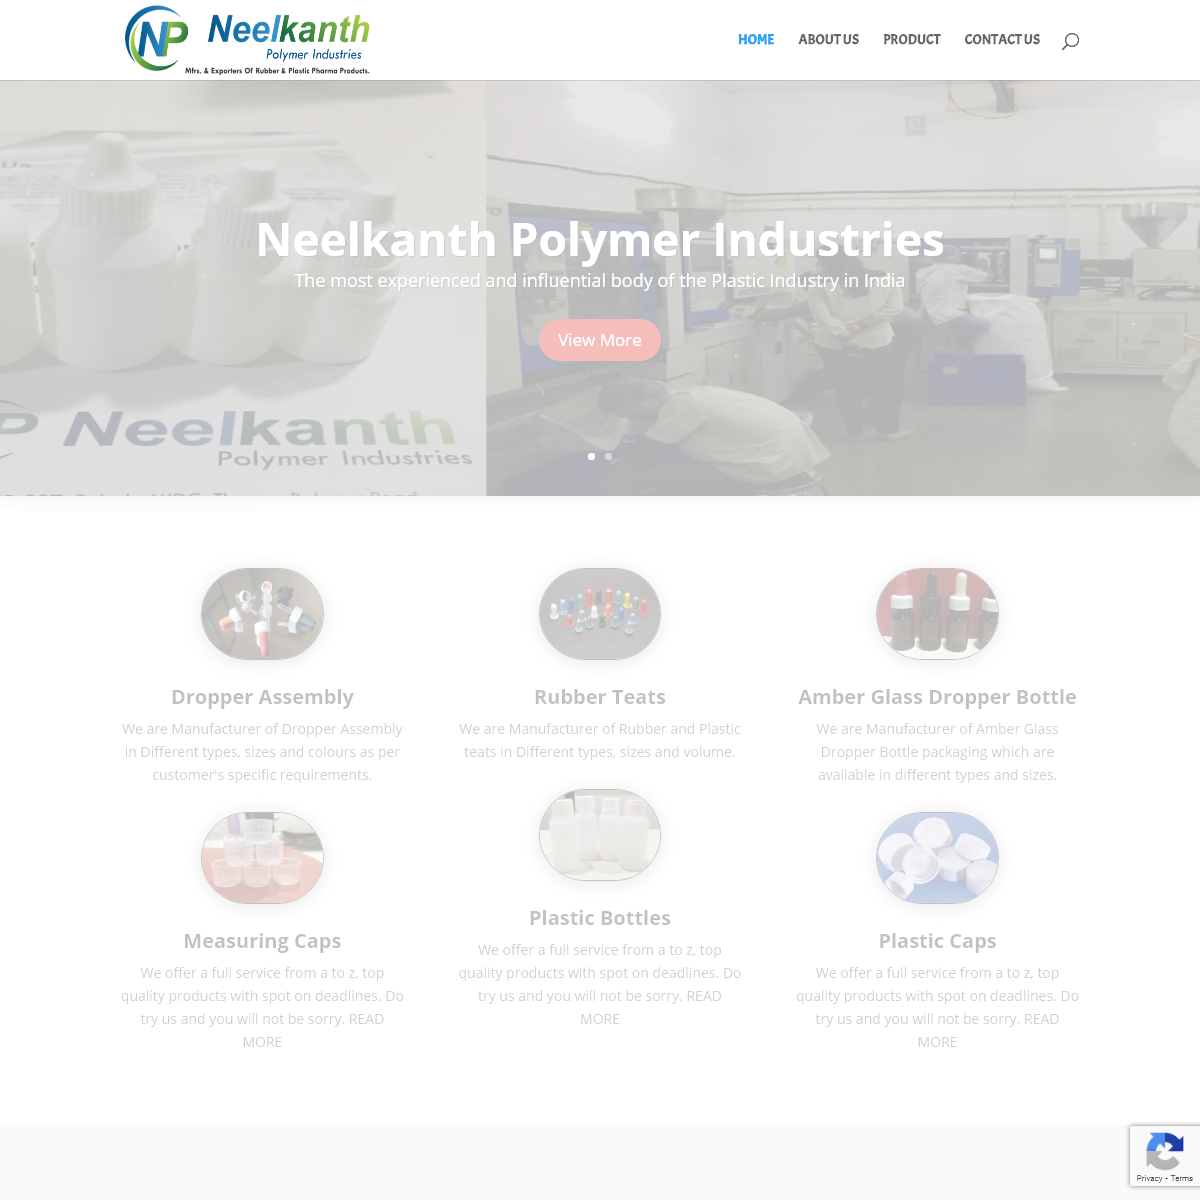 A complete backup of neelkanthpolymer.com